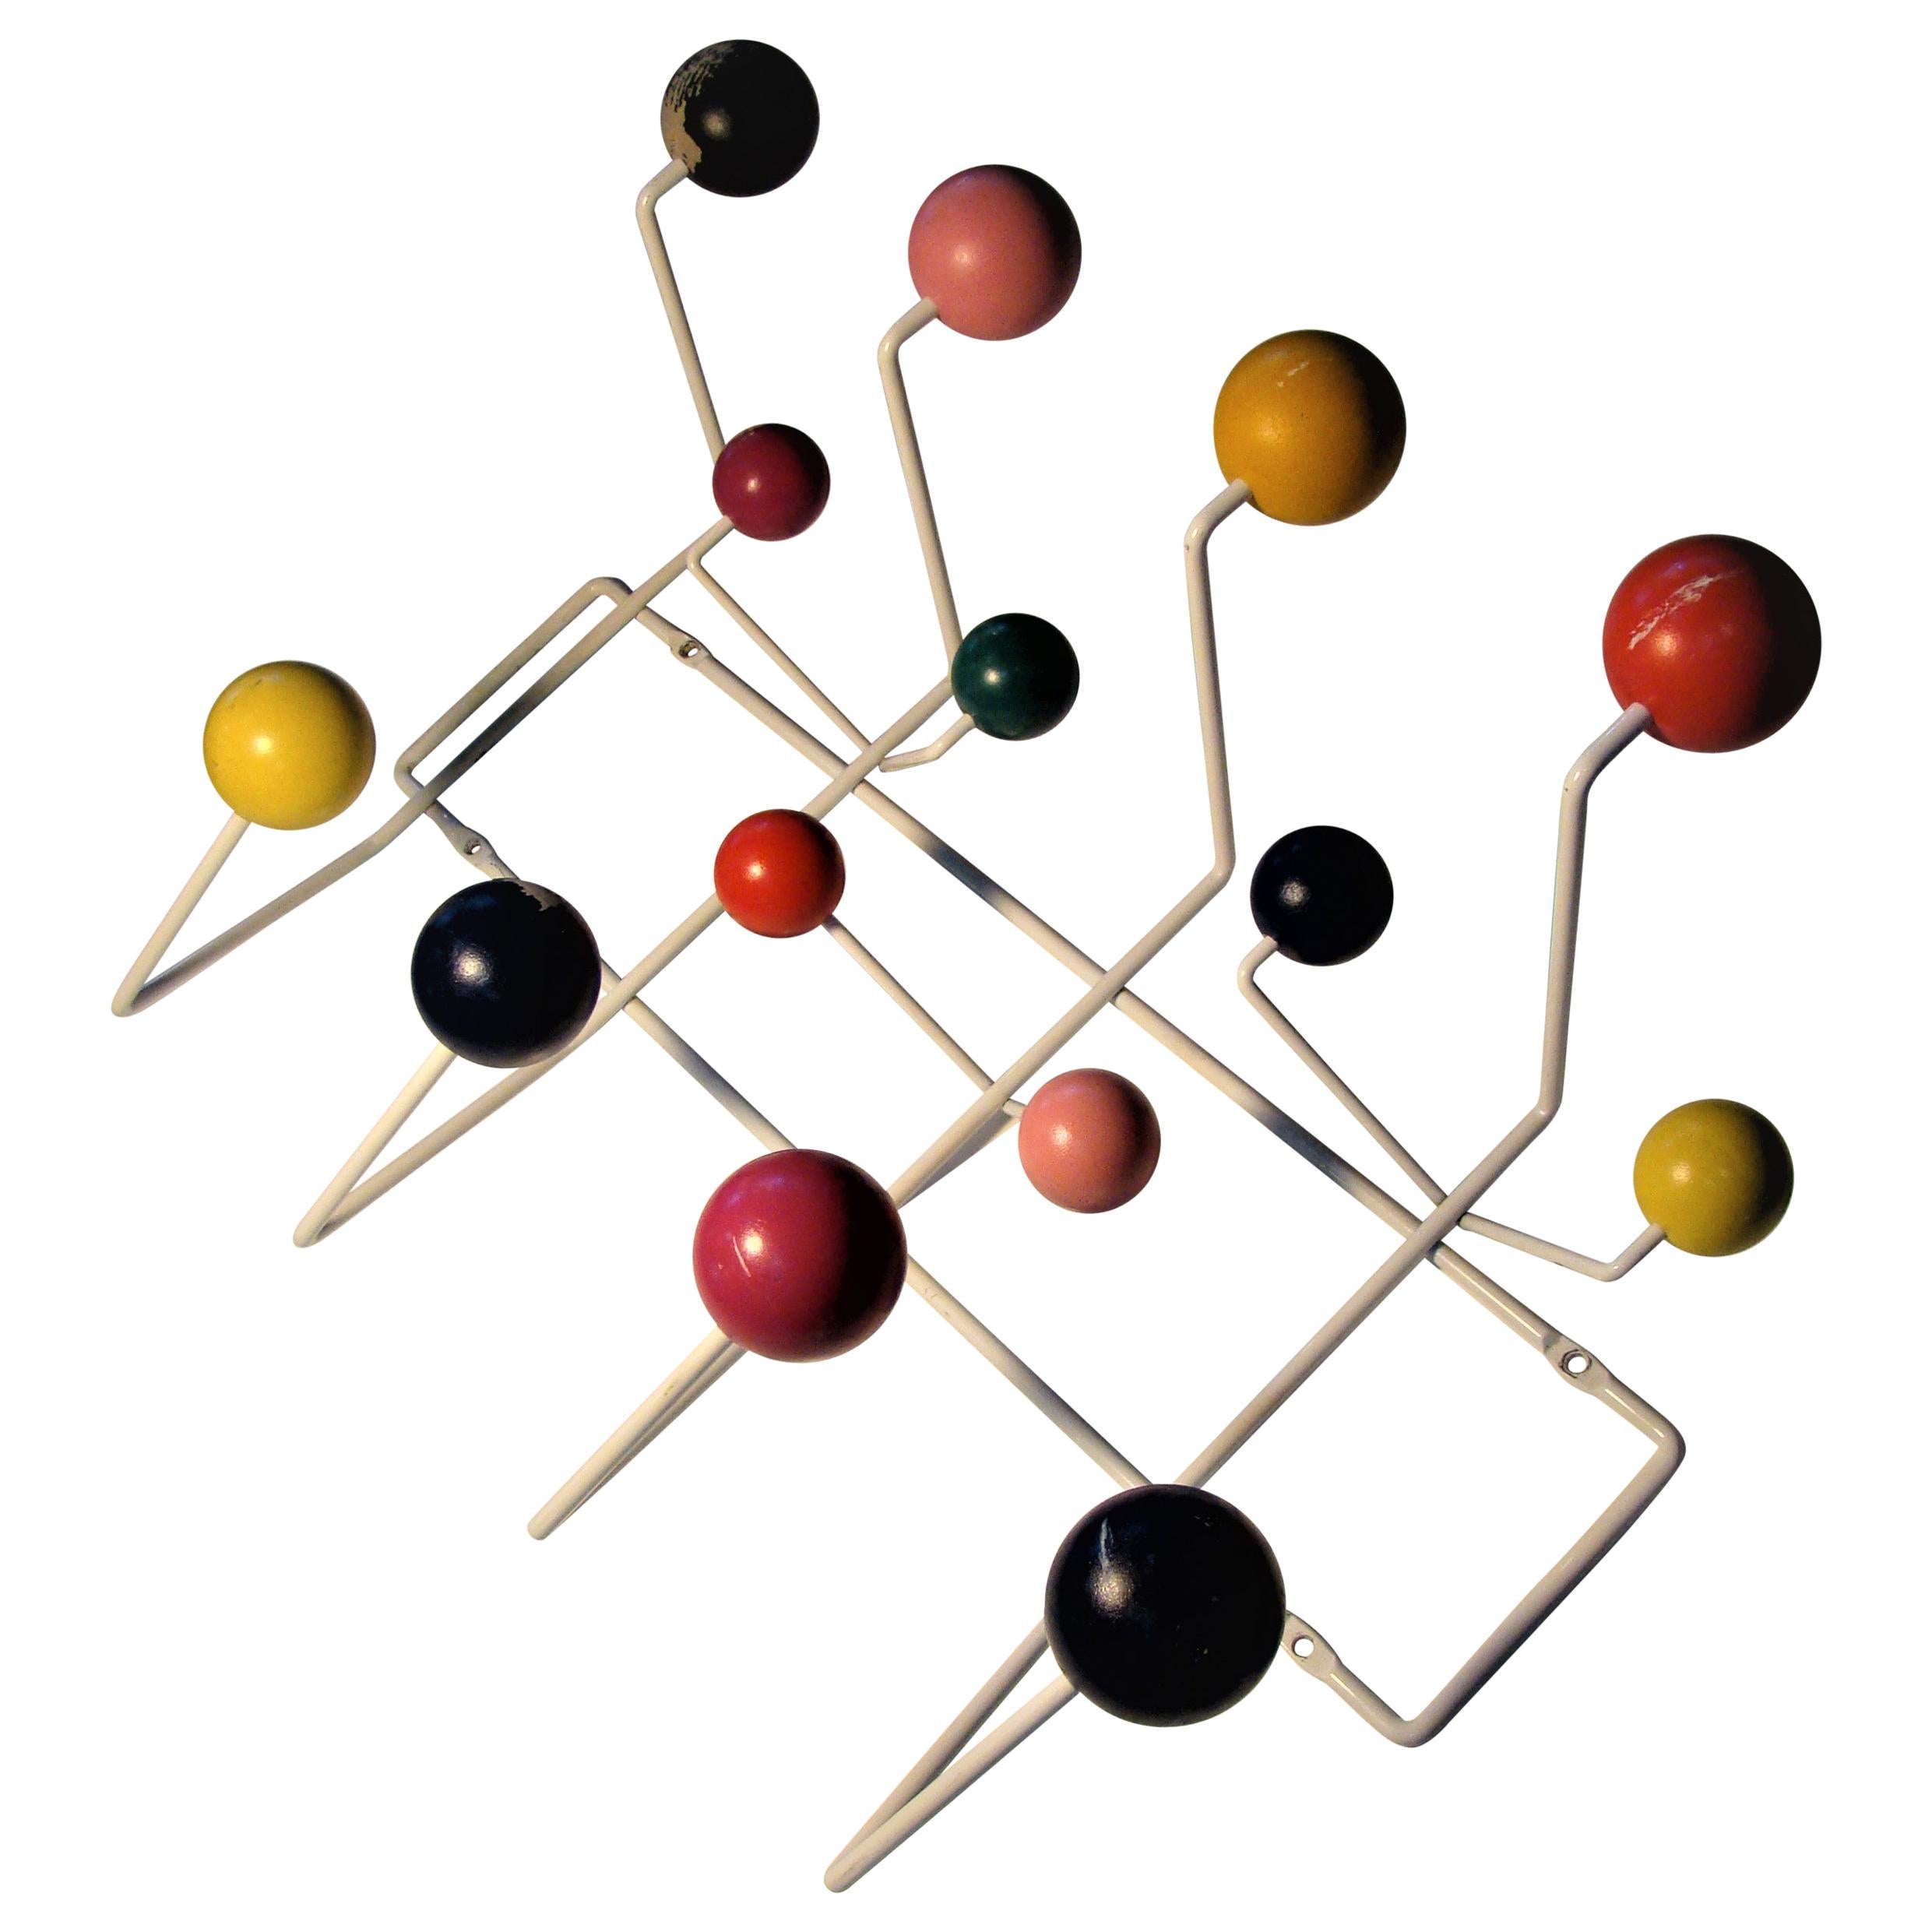 Herman Miller "Hang It All" Hat Rack/Coat Rack by Charles and Ray Eames